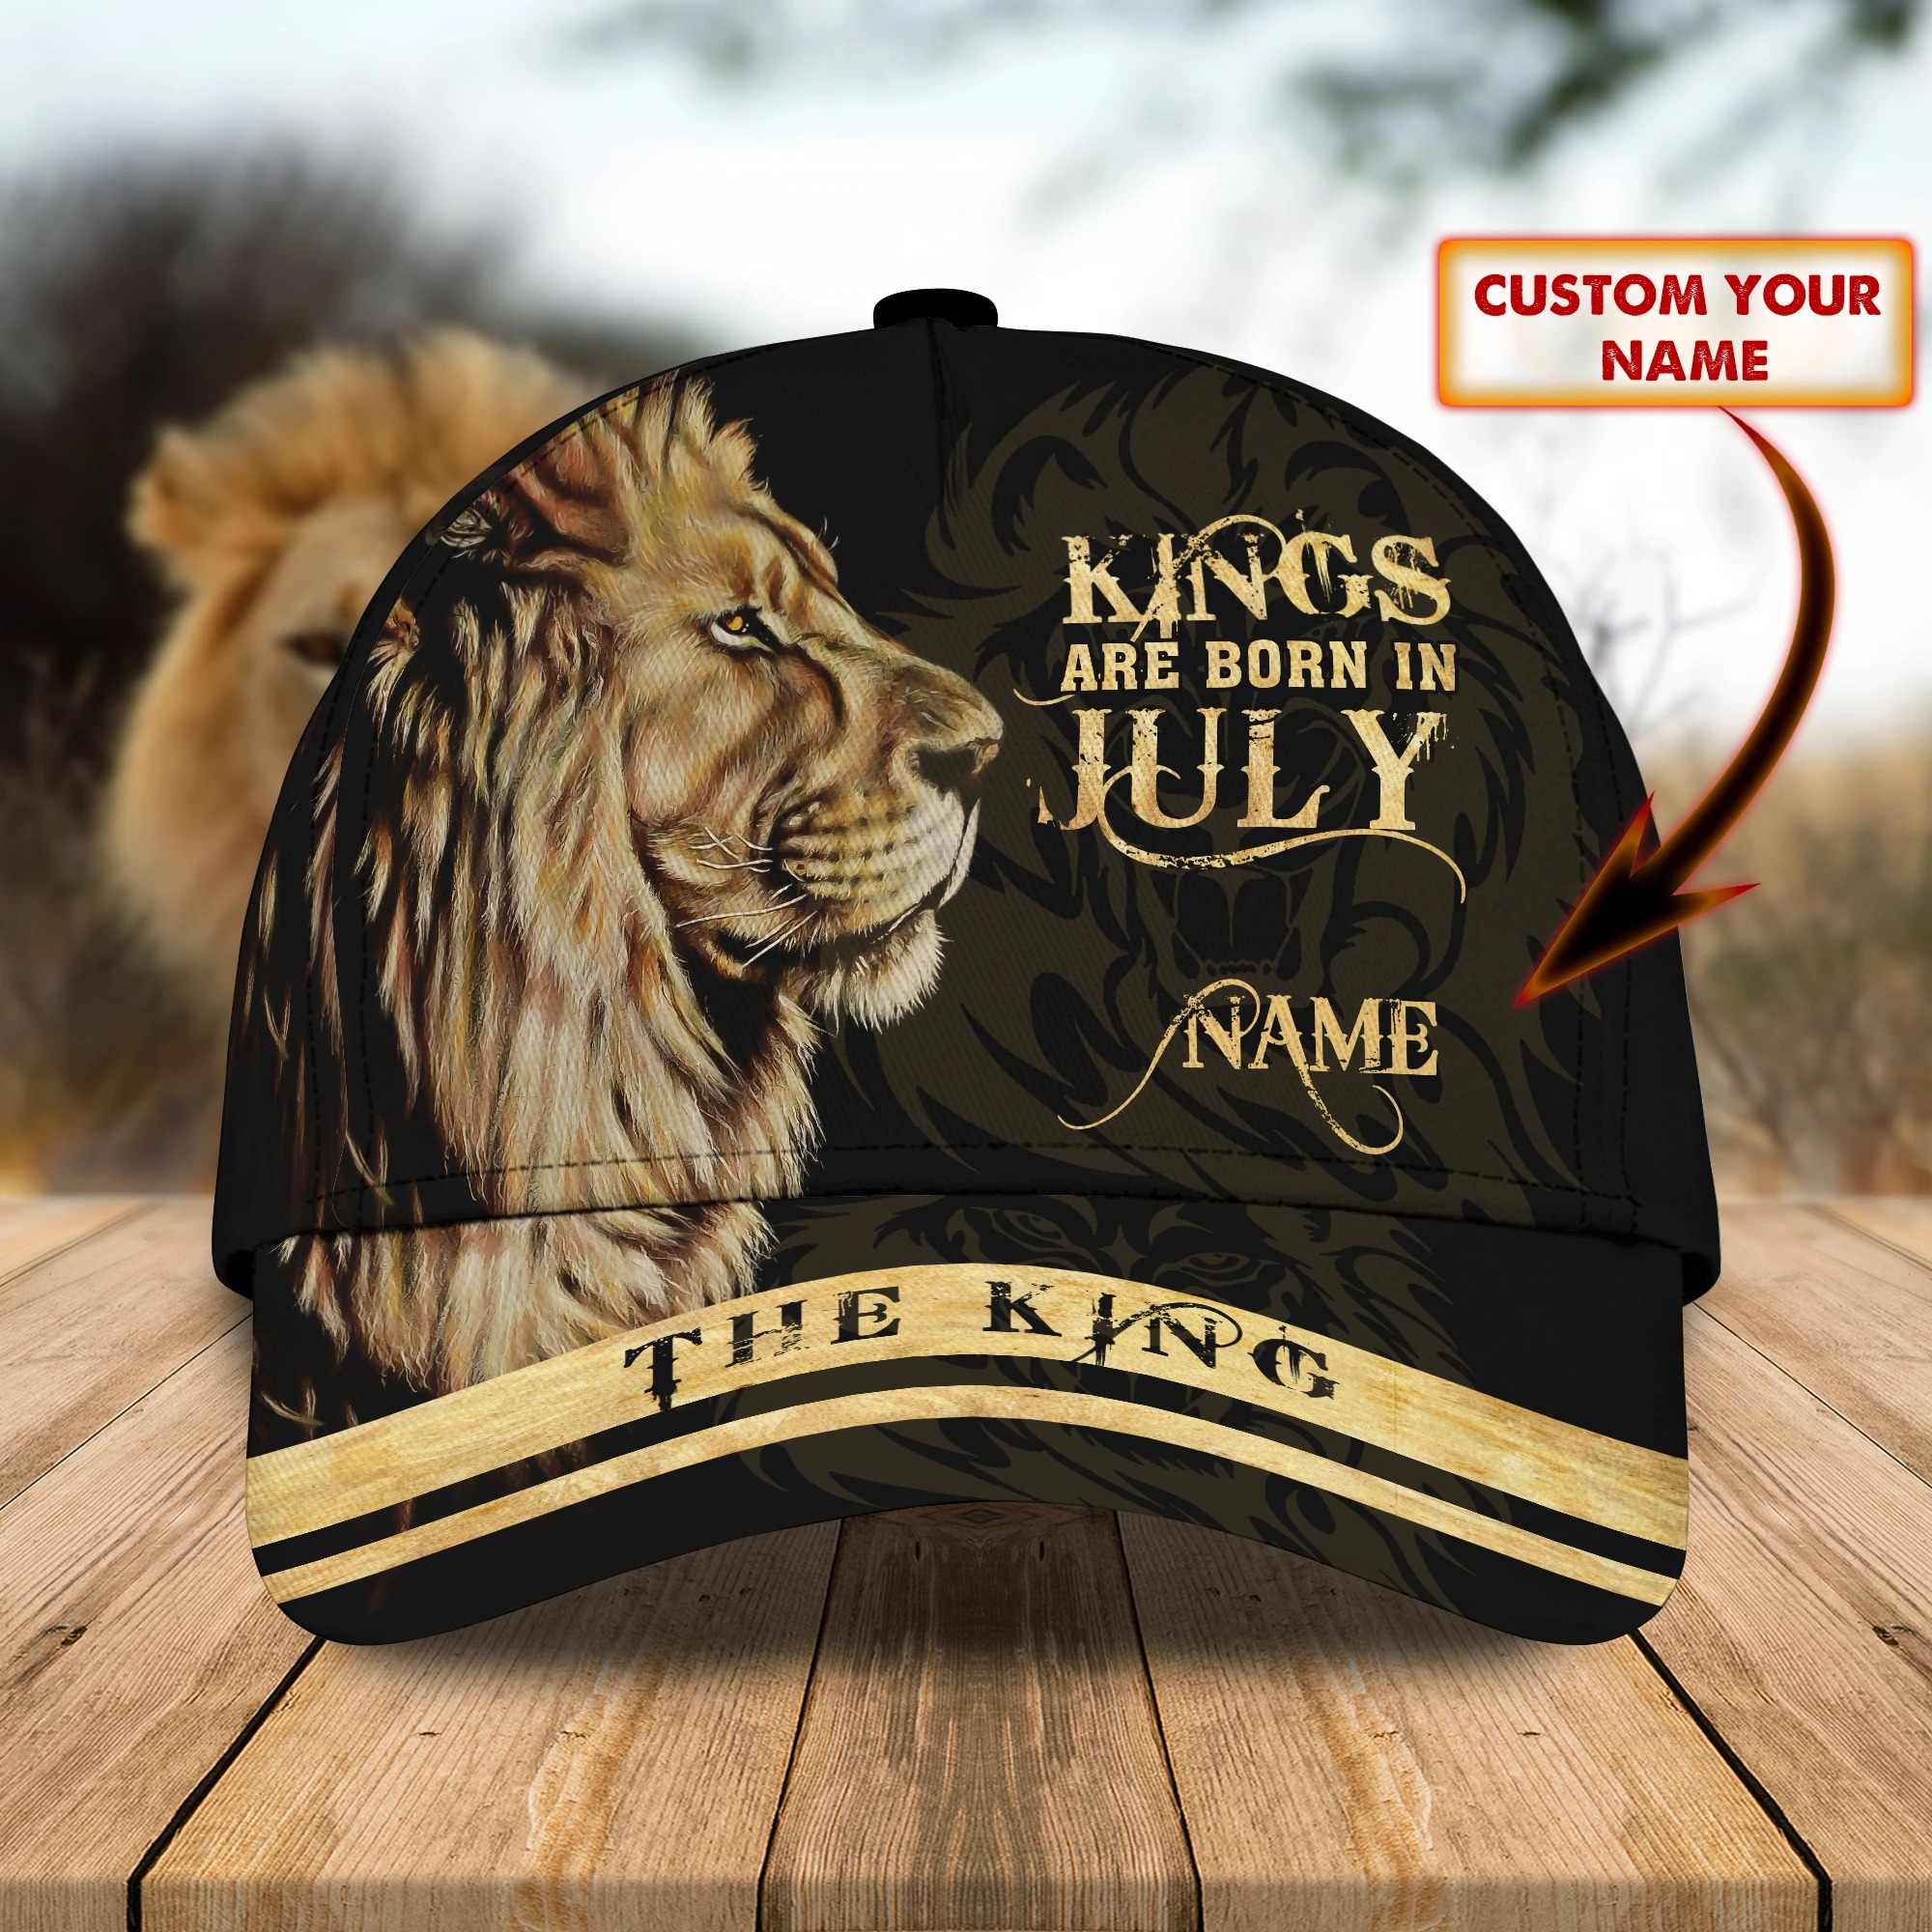 Lion Kings Are Born In July custom personalized name cap